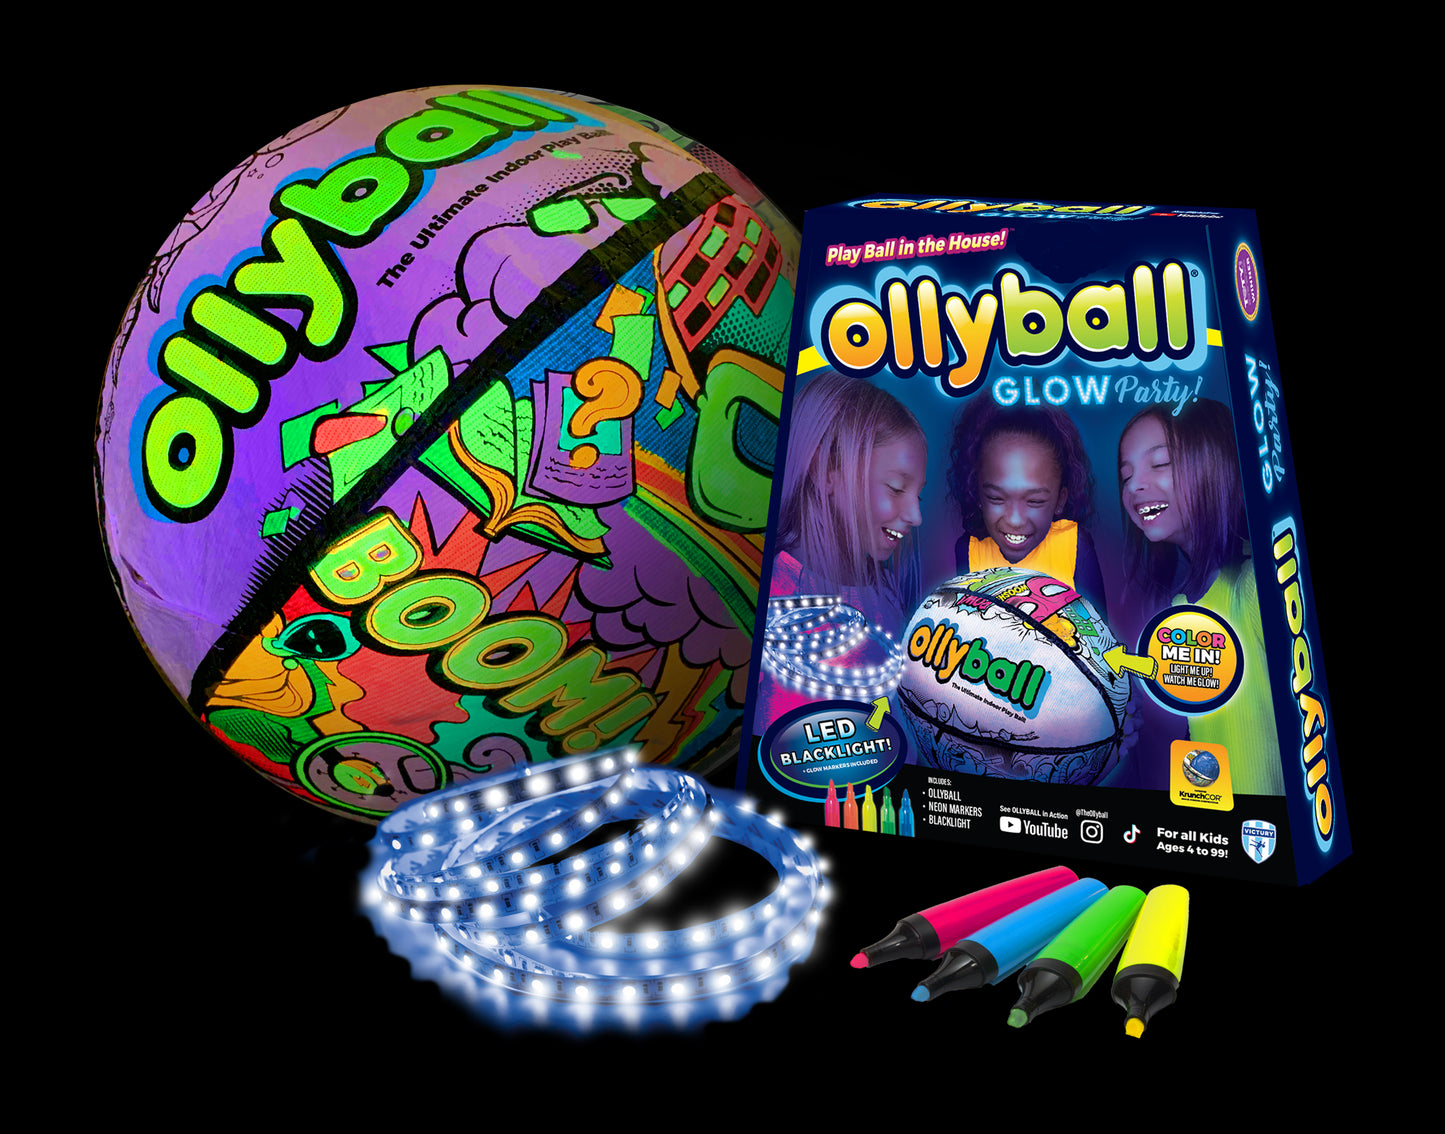 Ollyball GLOW PARTY!